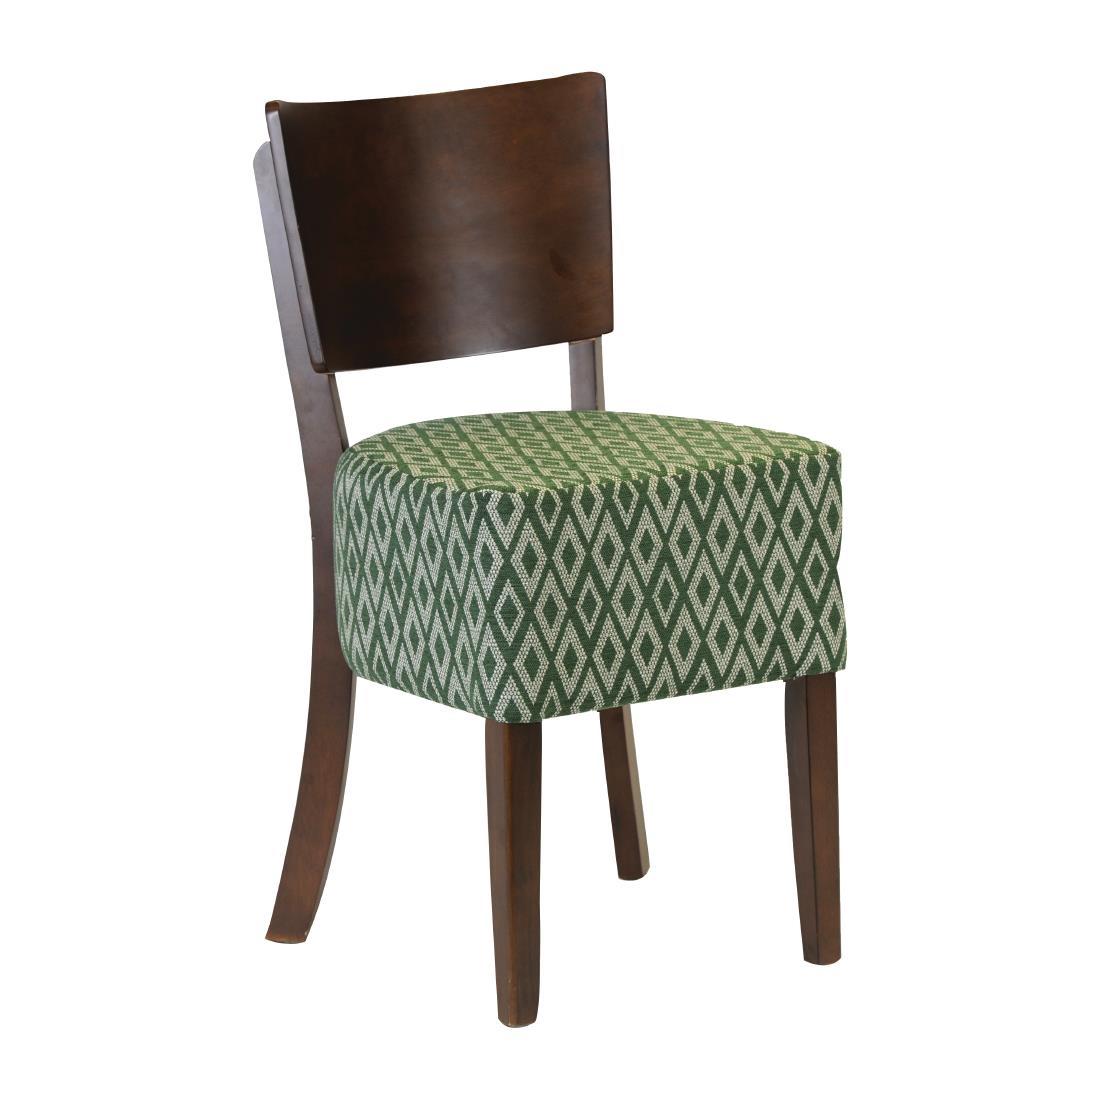 Asti Padded Dark Walnut Dining Chair with Green Diamond Deep Padded Seat and Back (Pack of 2) - FT423  - 1